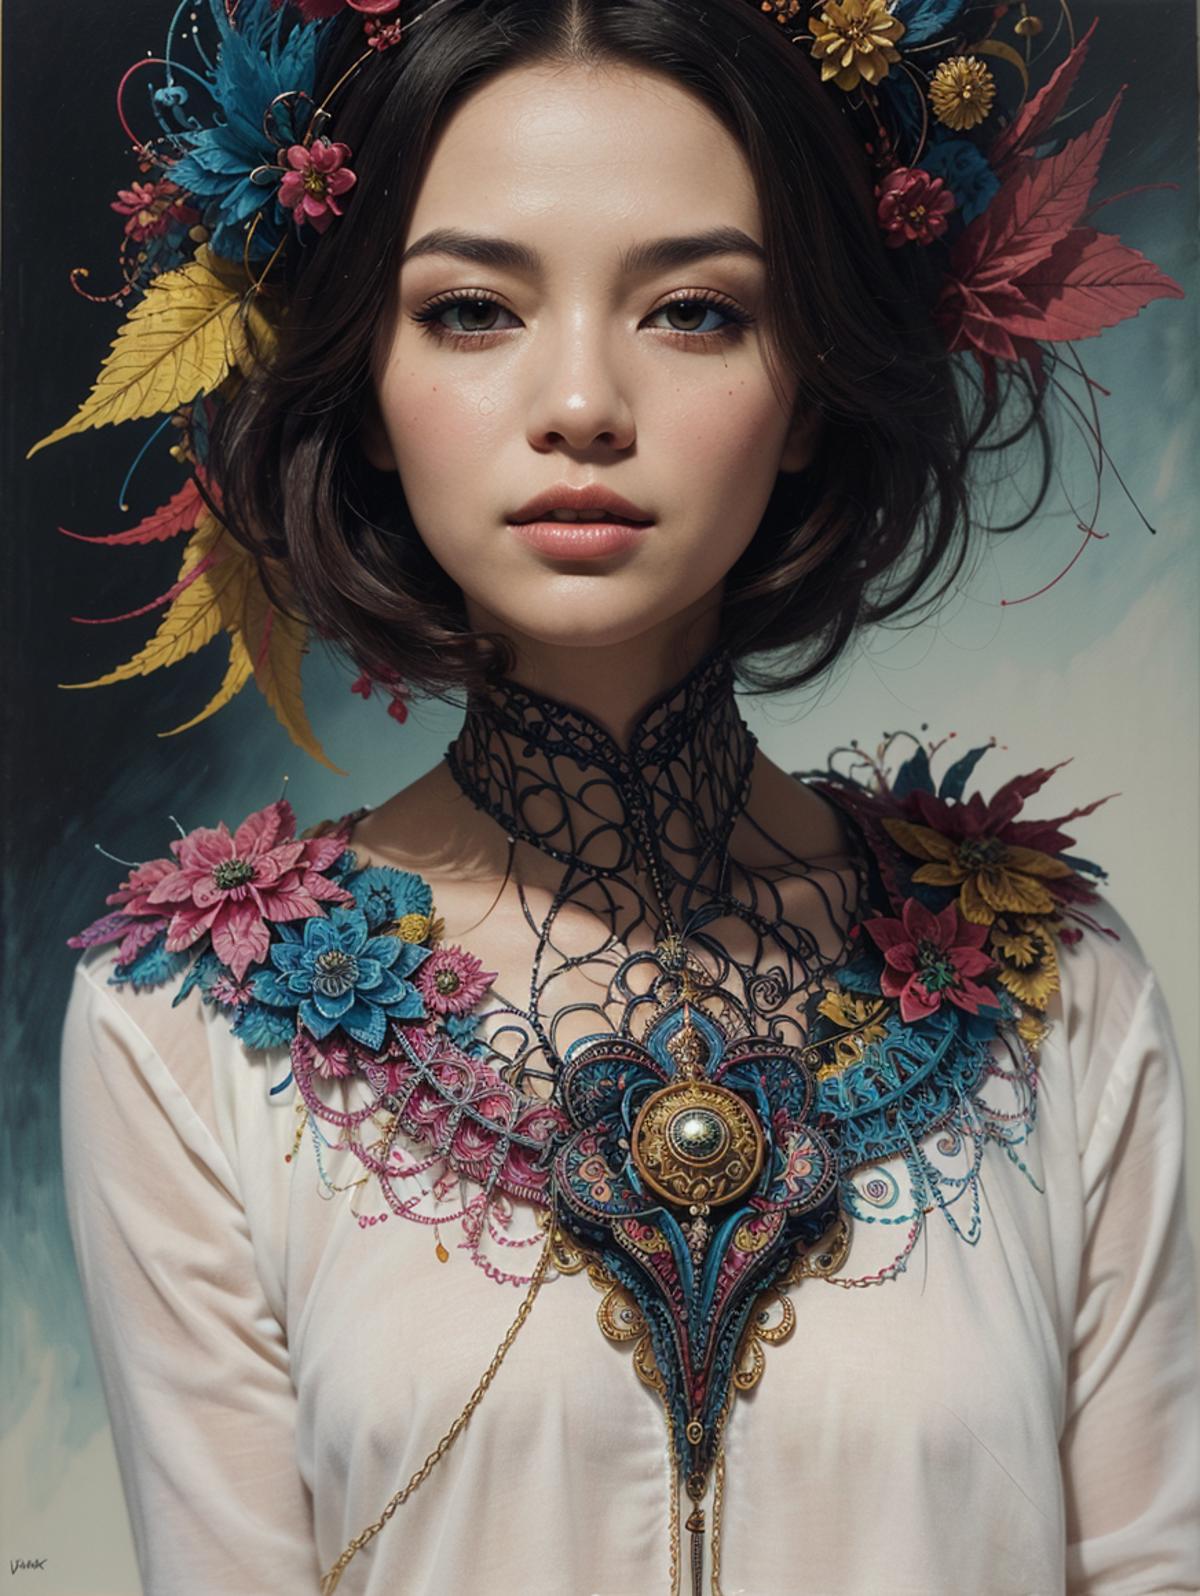 A woman with a flower crown and a lace choker necklace.